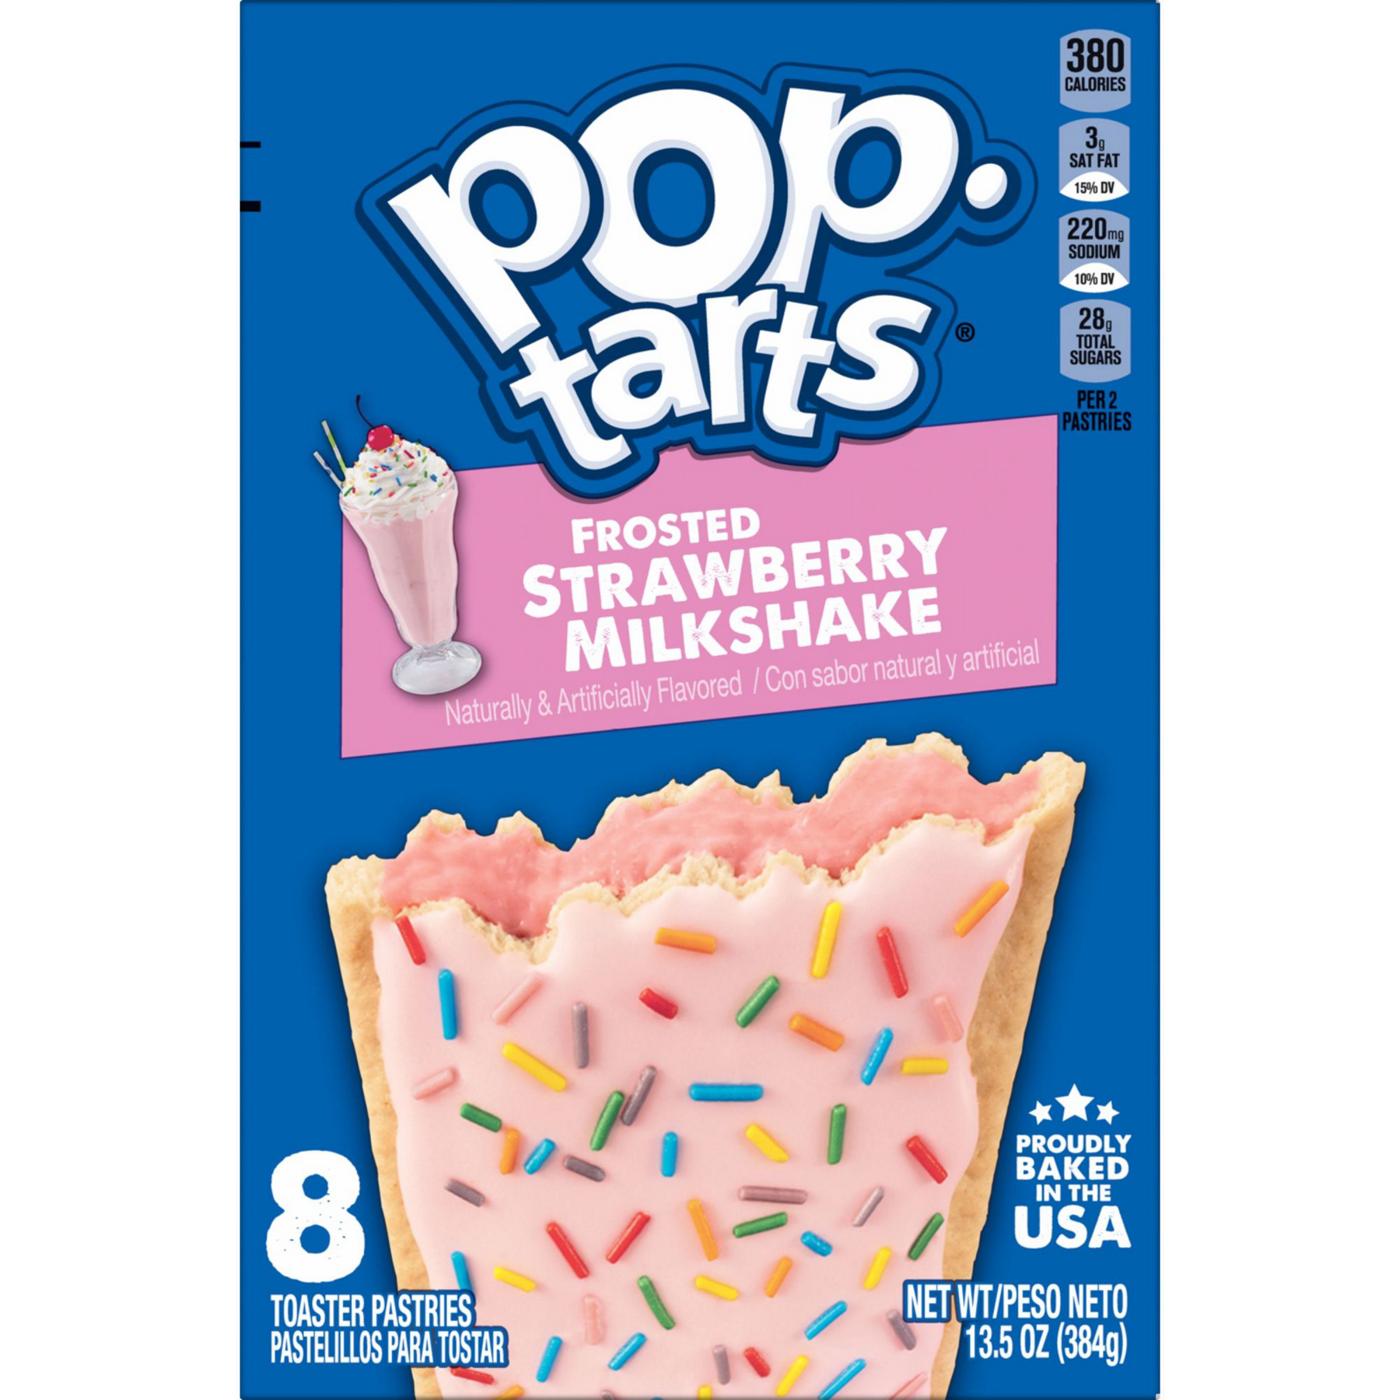 Pop-Tarts Frosted Strawberry Milkshake Toaster Pastries; image 2 of 6